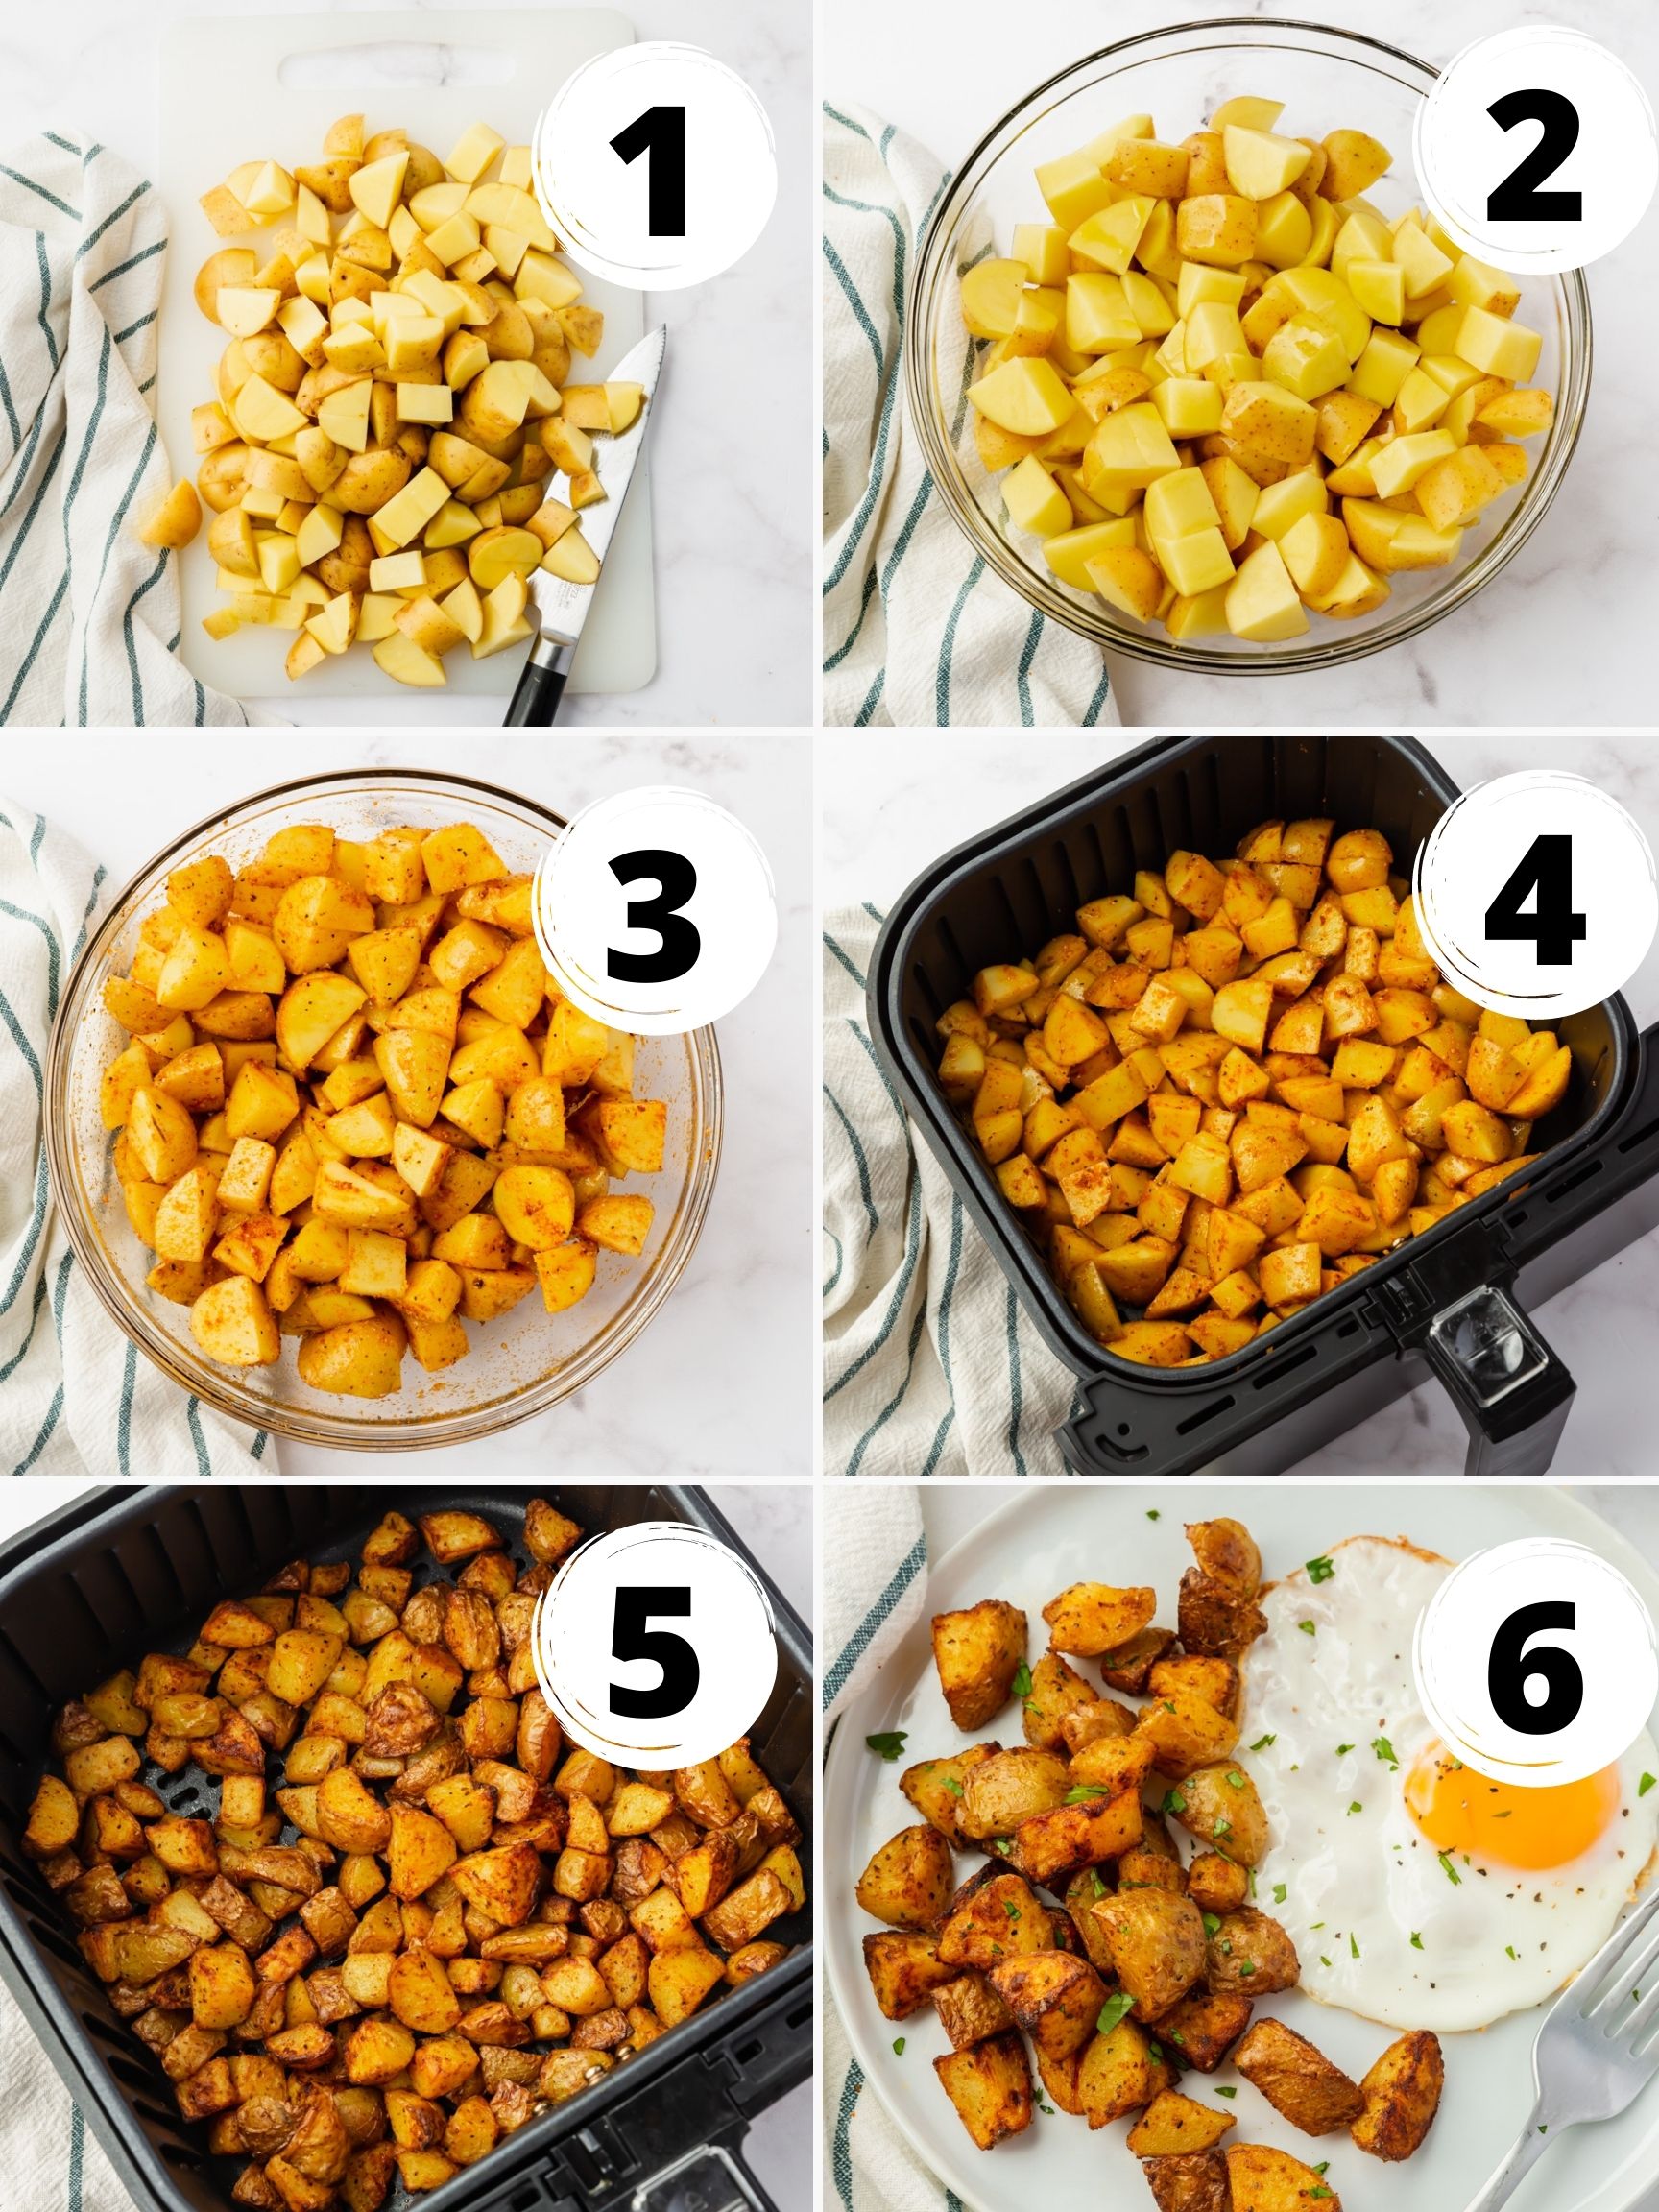 a collage of 6 images showing the process of making air fryer home fries. Final image shows homefries on a plate with fried egg